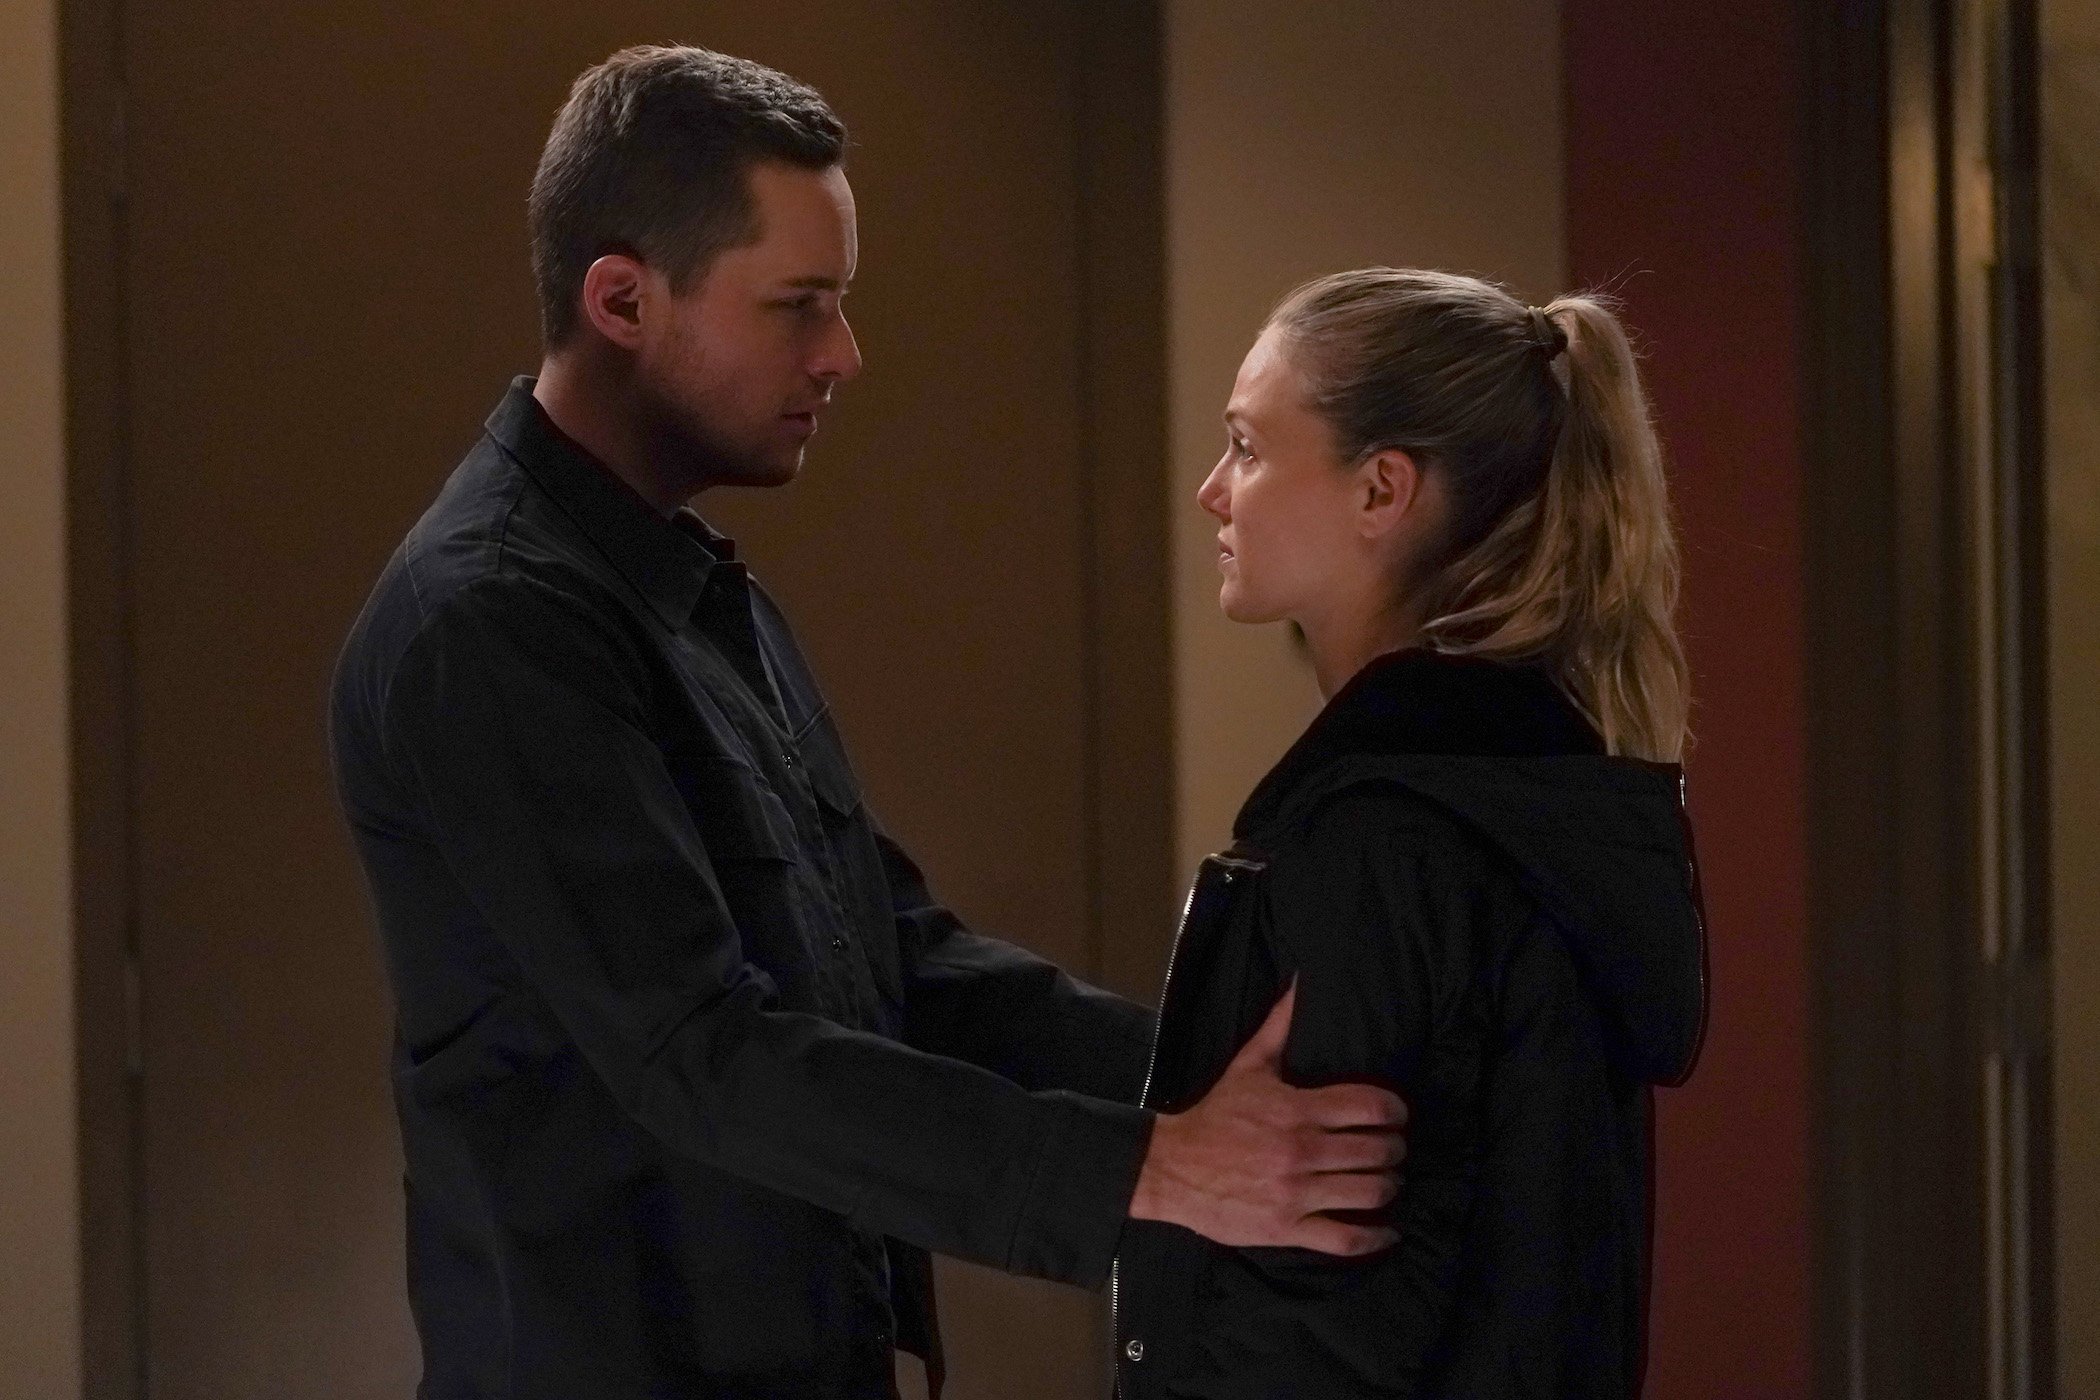 Jesse Lee Soffer as Jay Halstead and Tracy Spiridakos as Hailey Upton in 'Chicago P.D.' Season 9 Episode 1